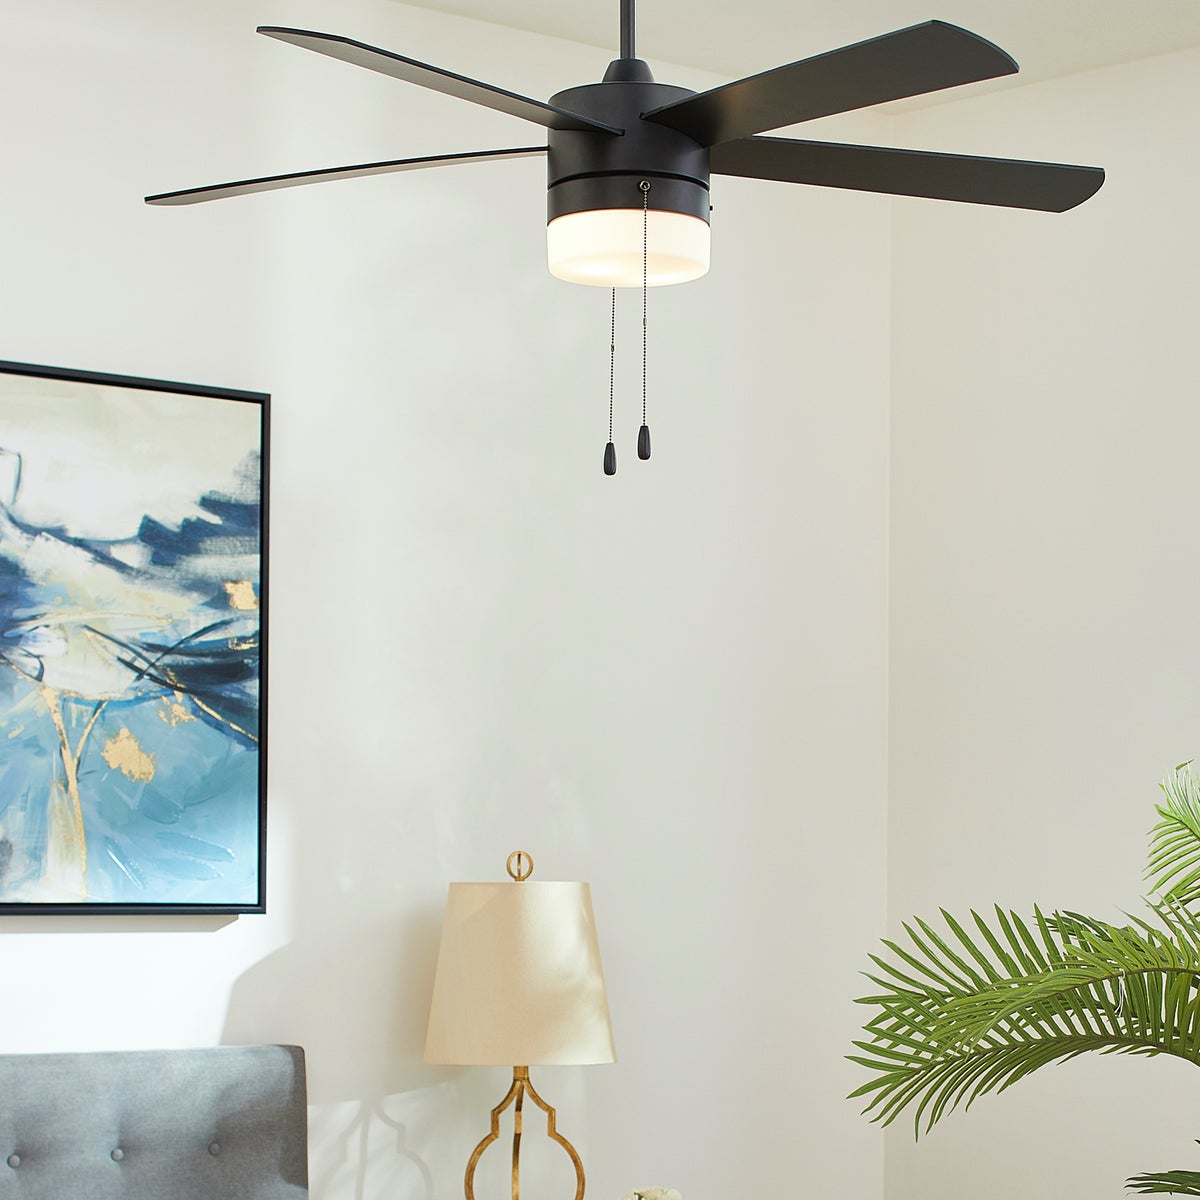 A mid century modern ceiling fan with a monochrome finish and a translucent lighting shade, designed for efficient air circulation. This 52" sweep fan effortlessly provides cooling comfort to your home.